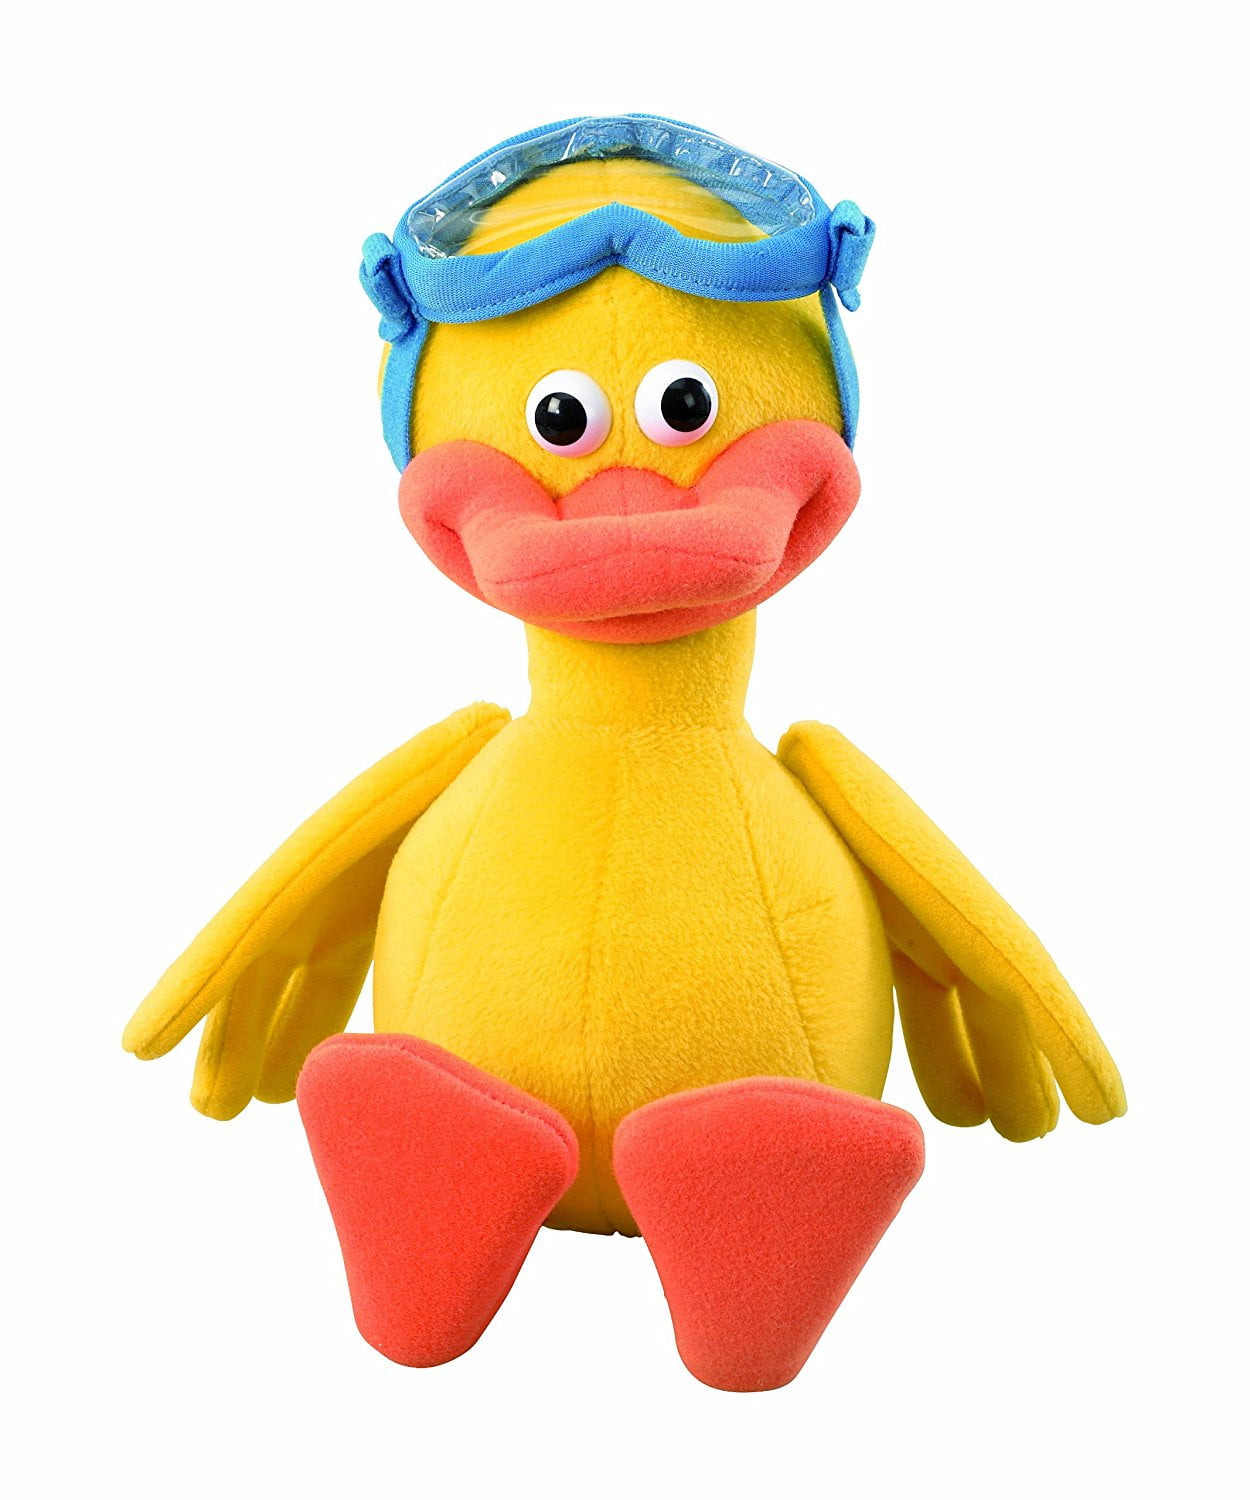 Timmy Time 50539 Soft Yabba Plush Duck for Kids Aged 3 Toys